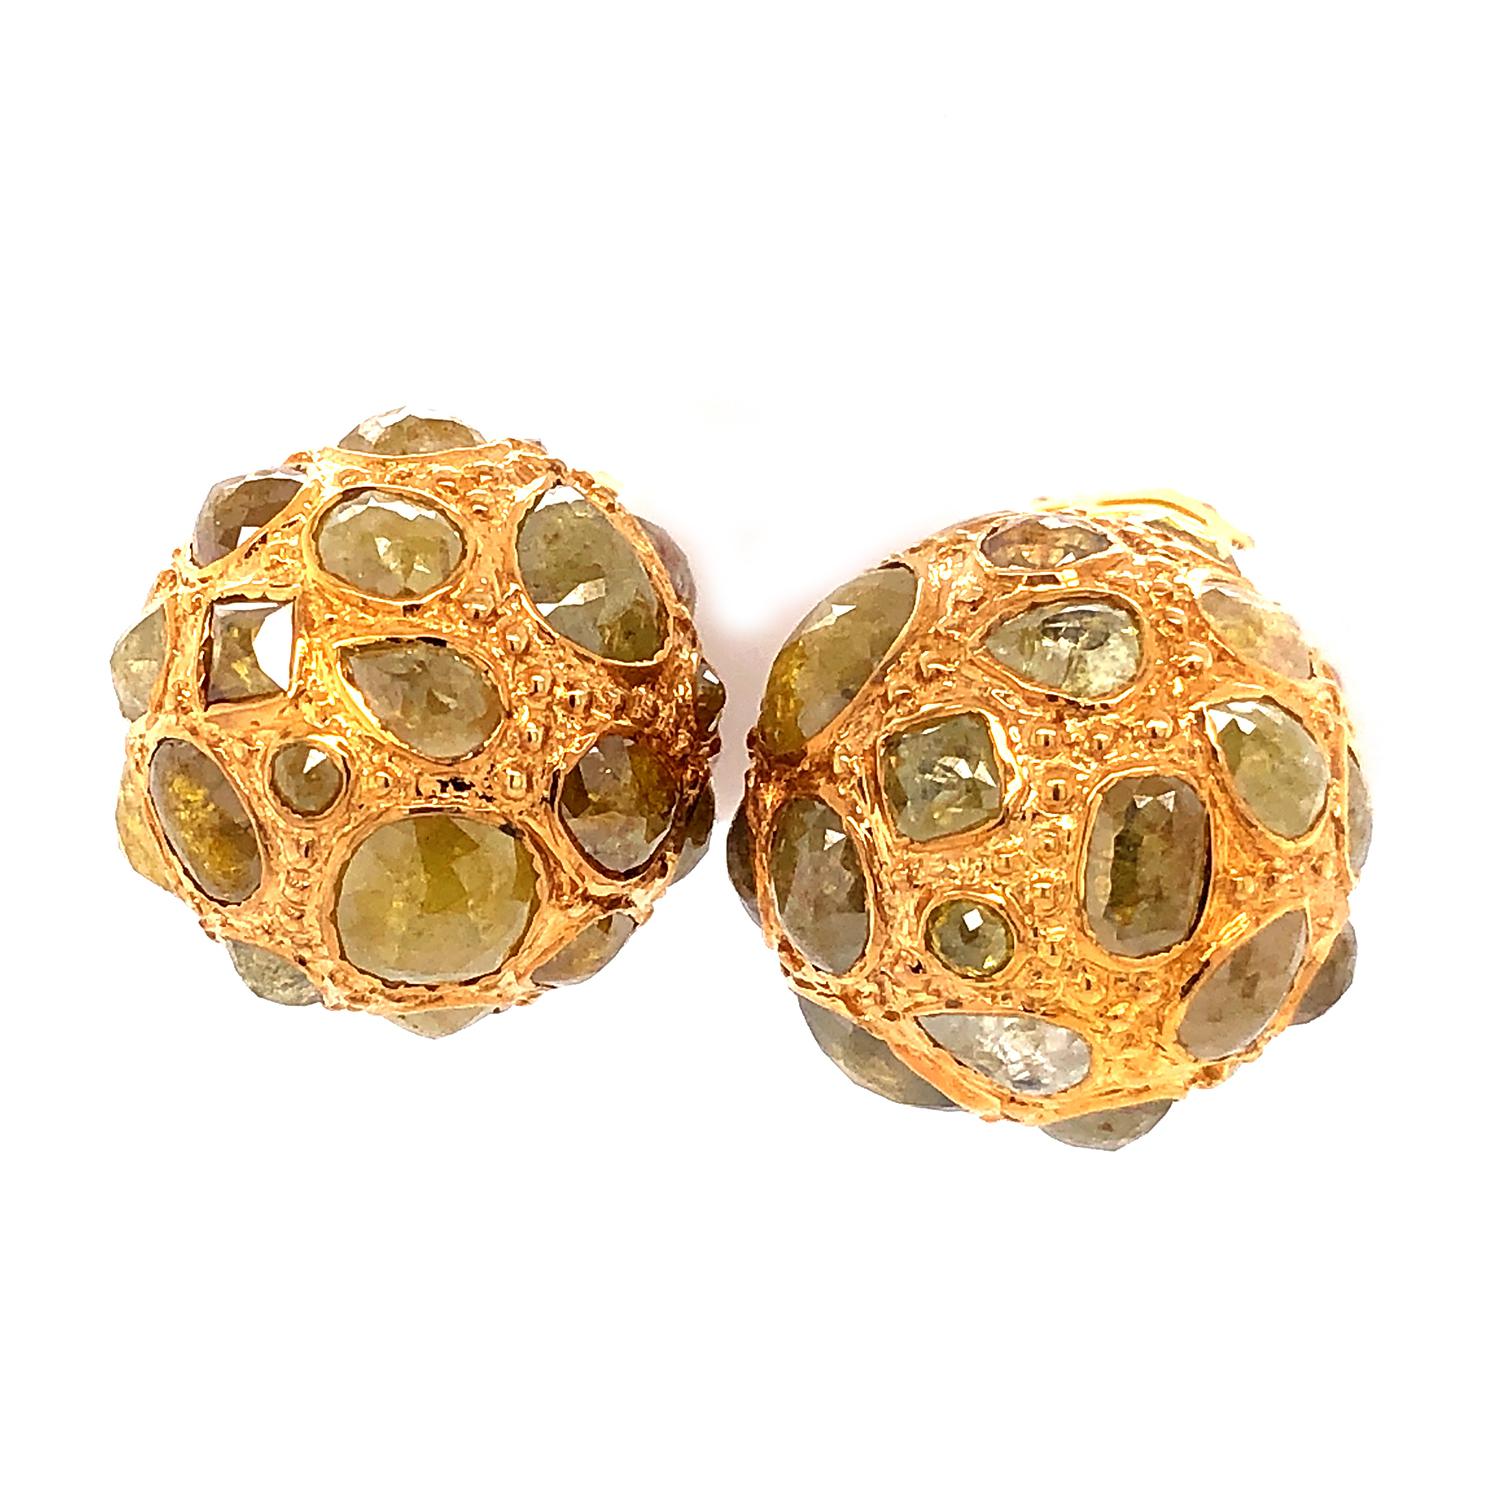 Art Nouveau Ice Diamond Beads Earrings with Pave Diamonds Made in 18k Gold For Sale